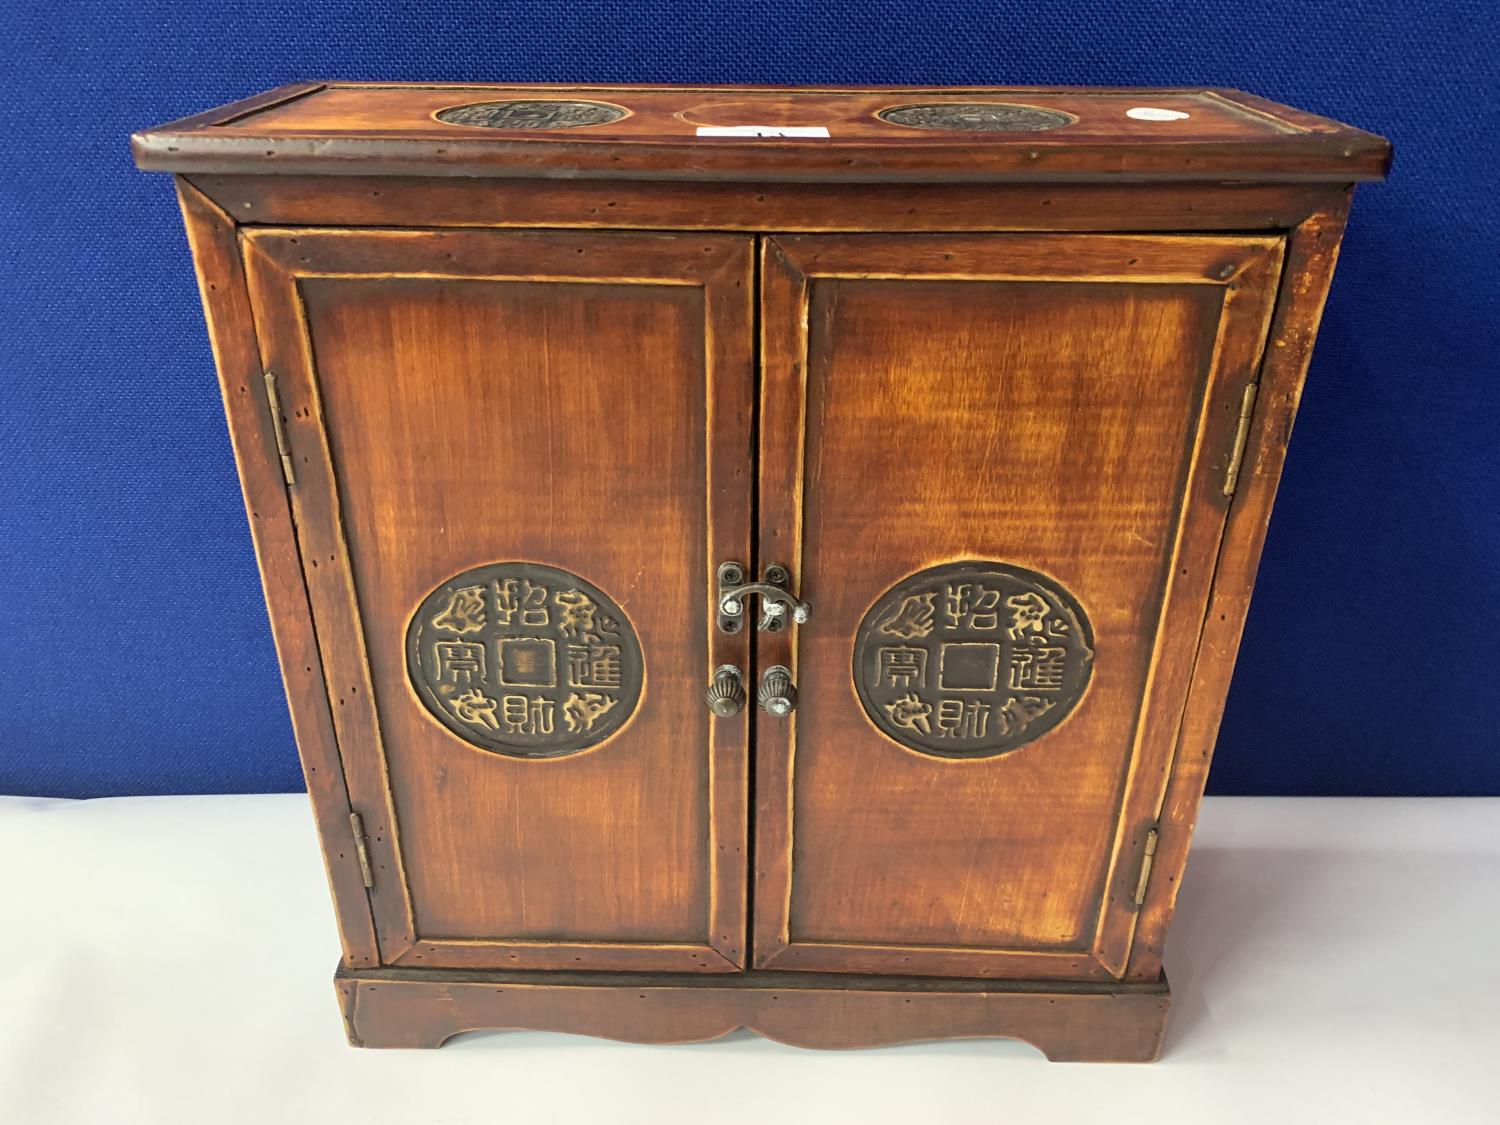 AN ORIENTAL STYLE CABINET WITH INLAID CIRCULAR PANELS